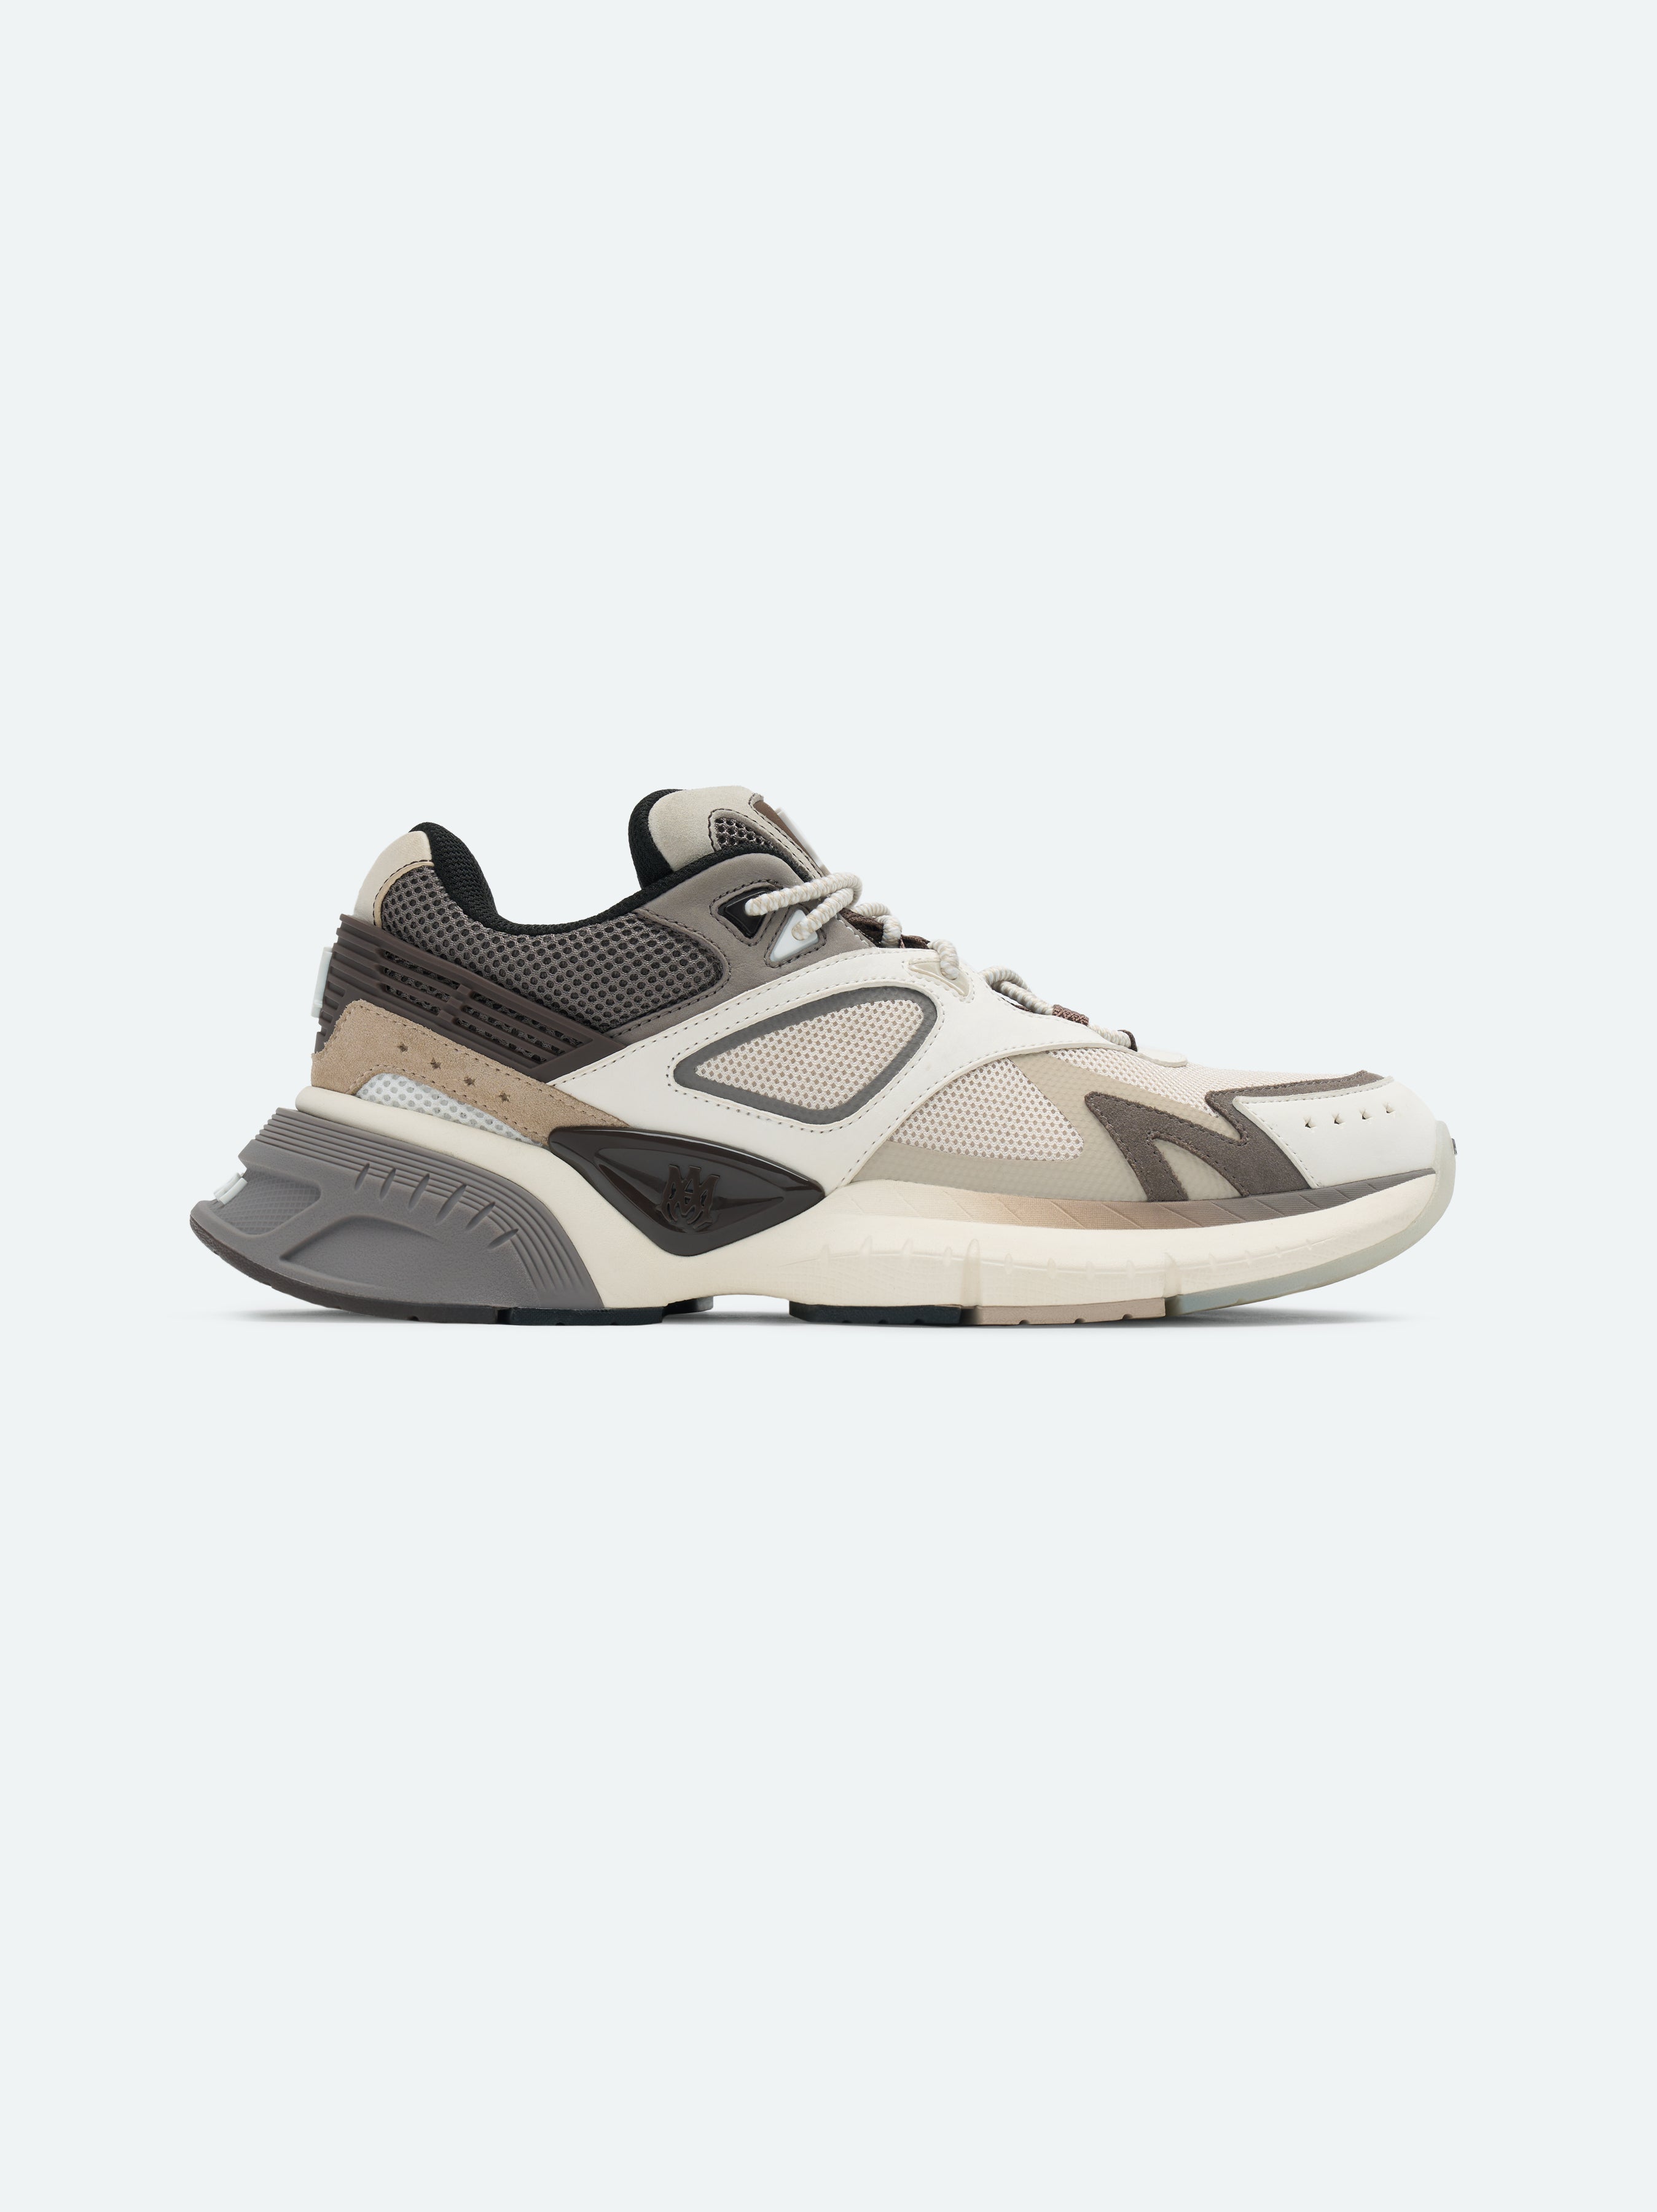 Product WOMEN - MA RUNNER - Brown featured image